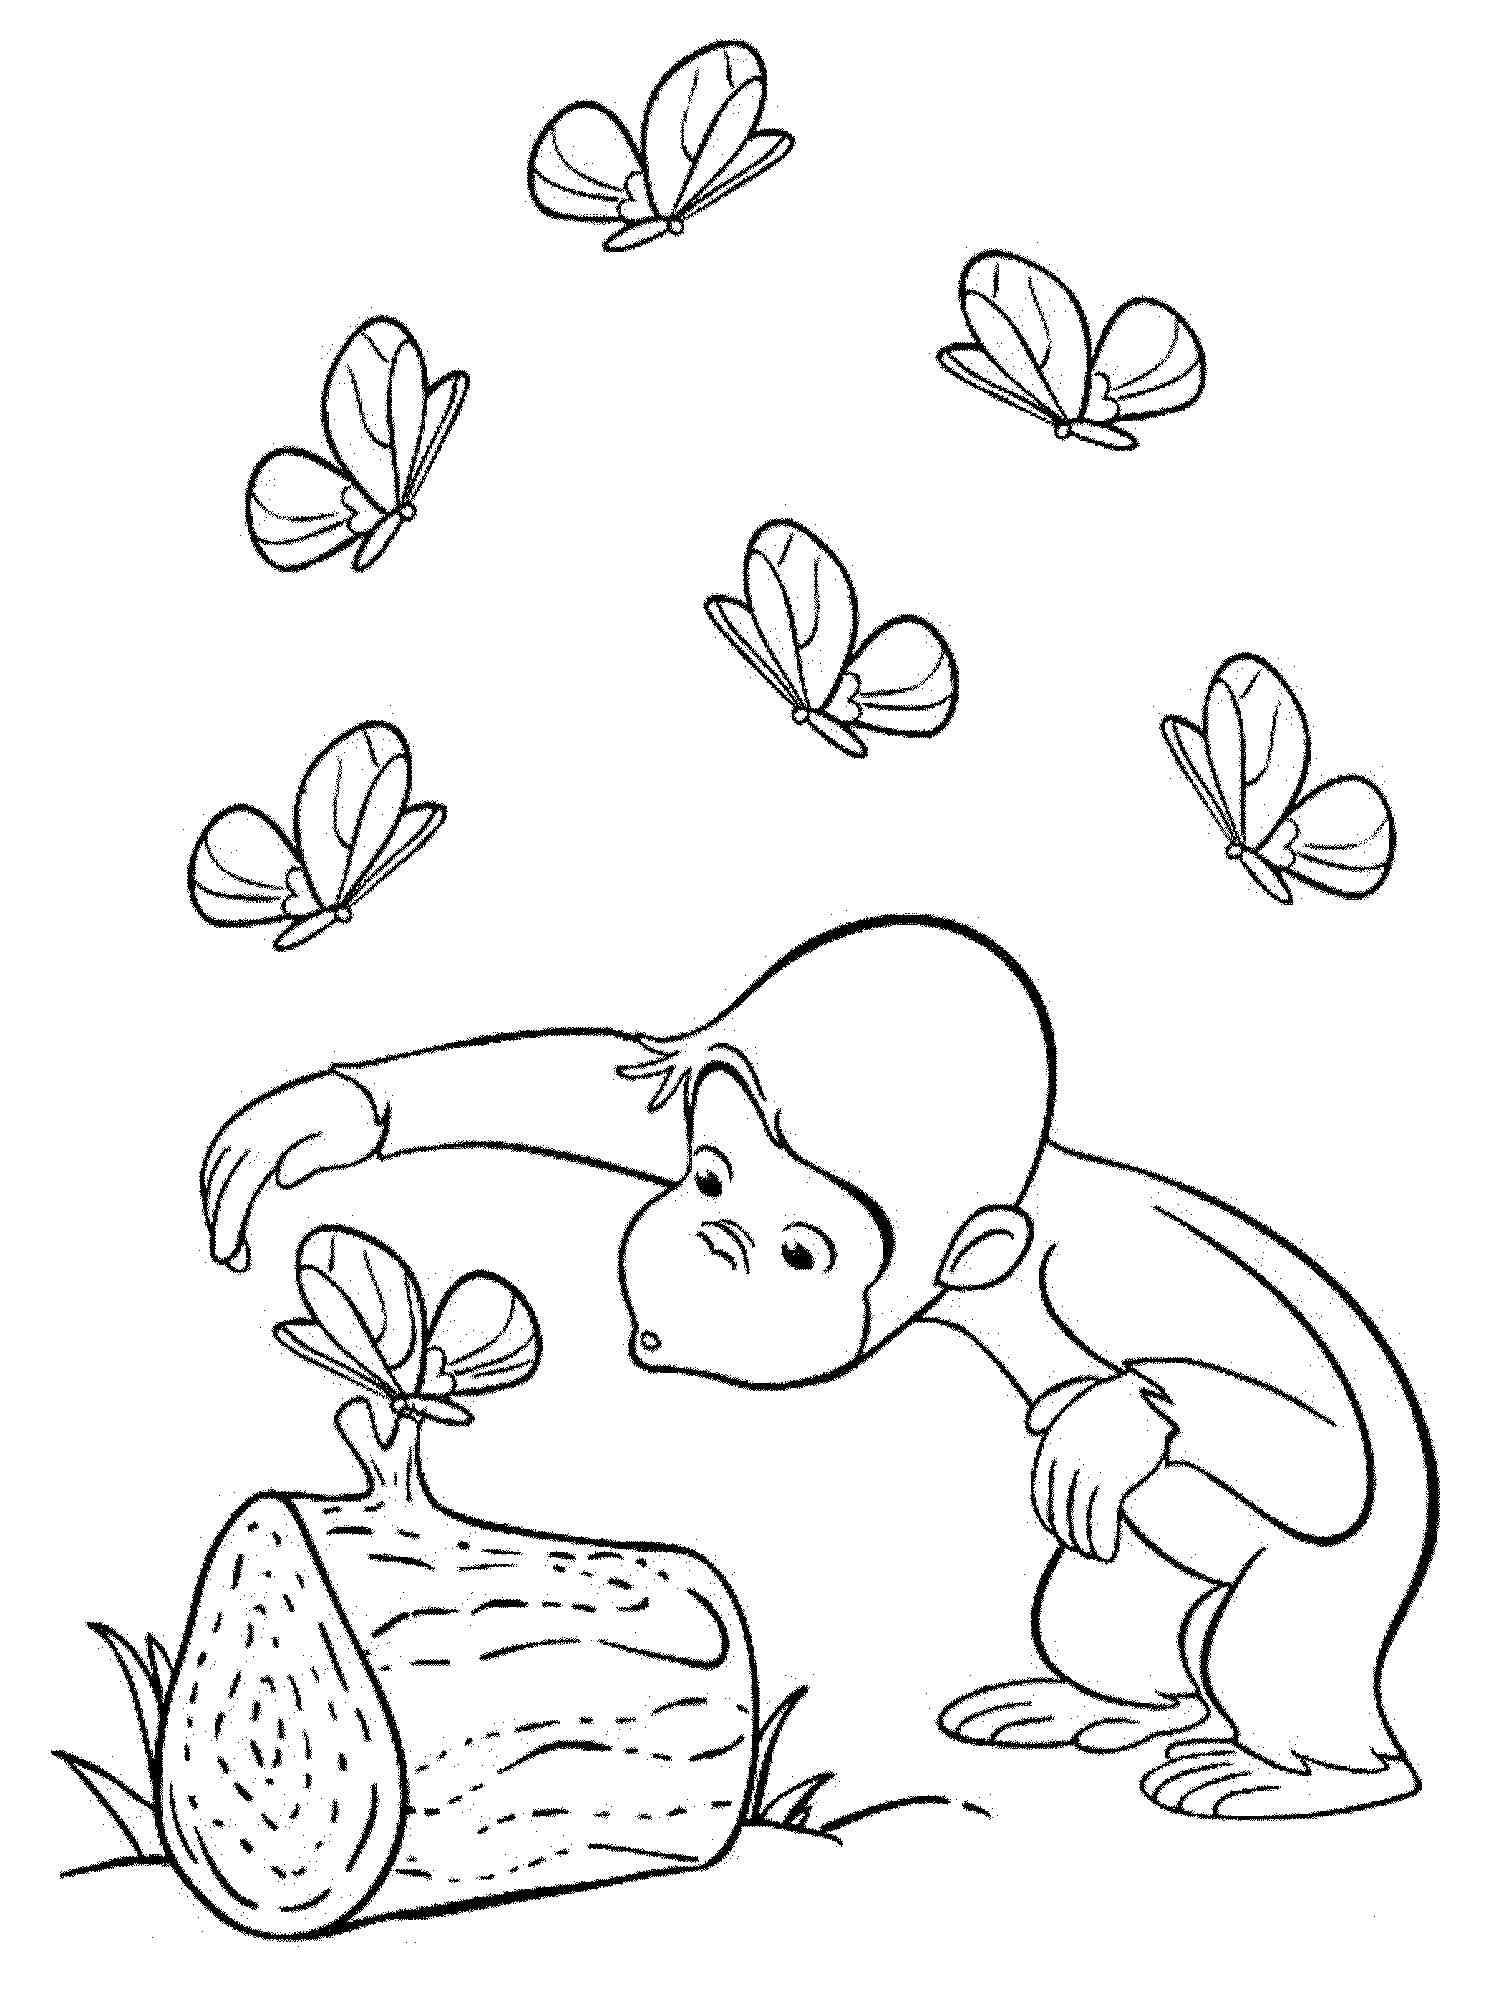 Curious George 13 coloring page